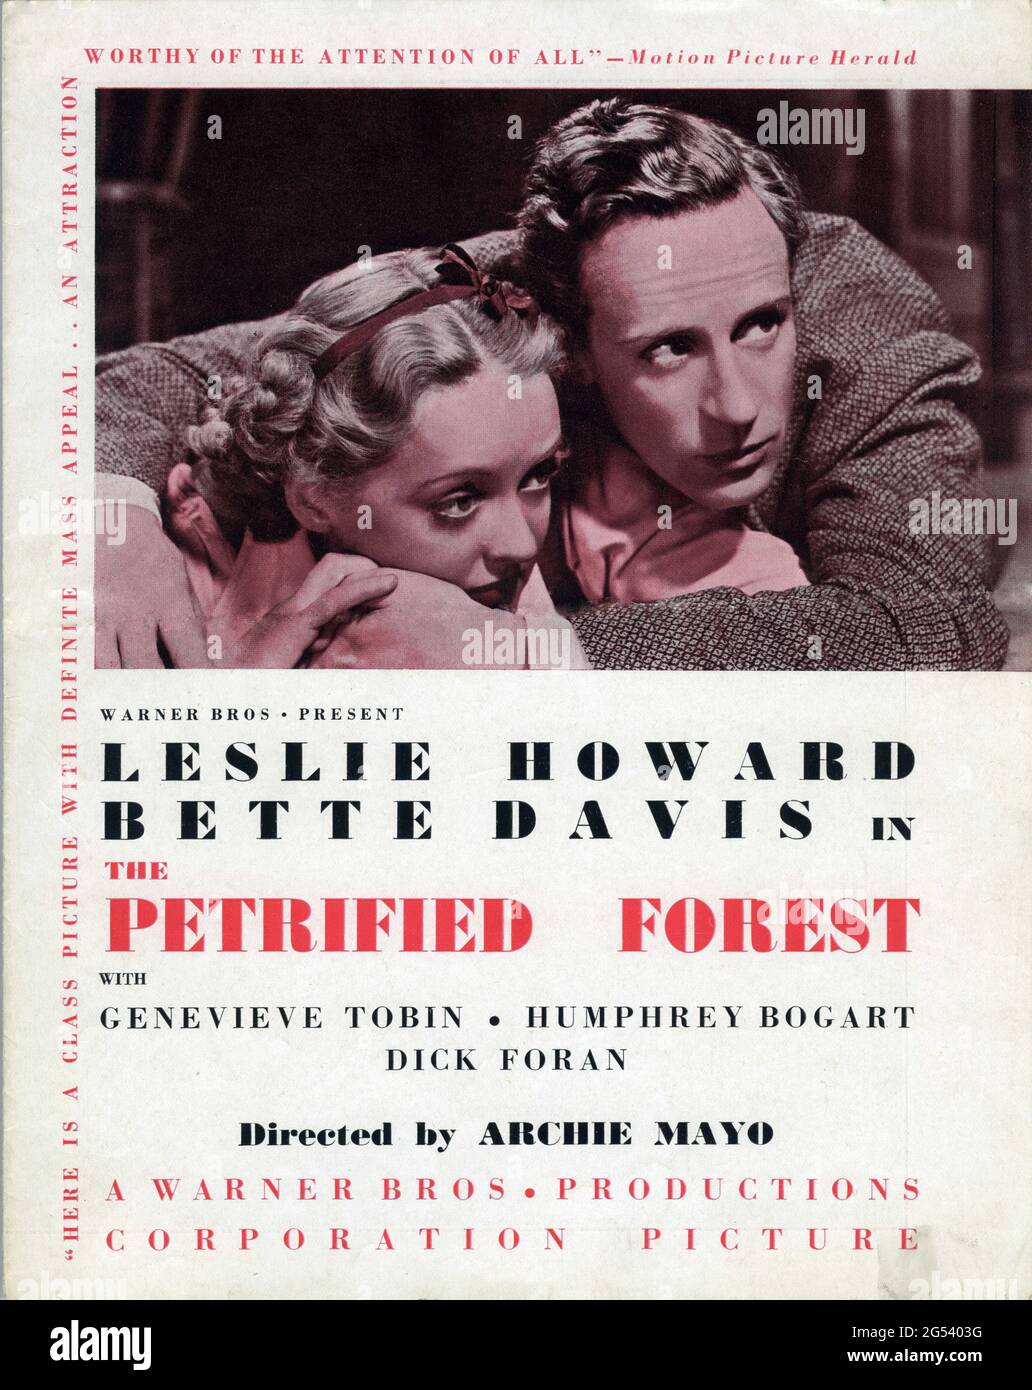 LESLIE HOWARD BETTE DAVIS and HUMPHREY BOGART in THE PETRIFIED FOREST 1936 director ARCHIE MAYO play Robert E. Sherwood screenplay Charles Kenyon and Delmer Daves Warner Bros. Stock Photo